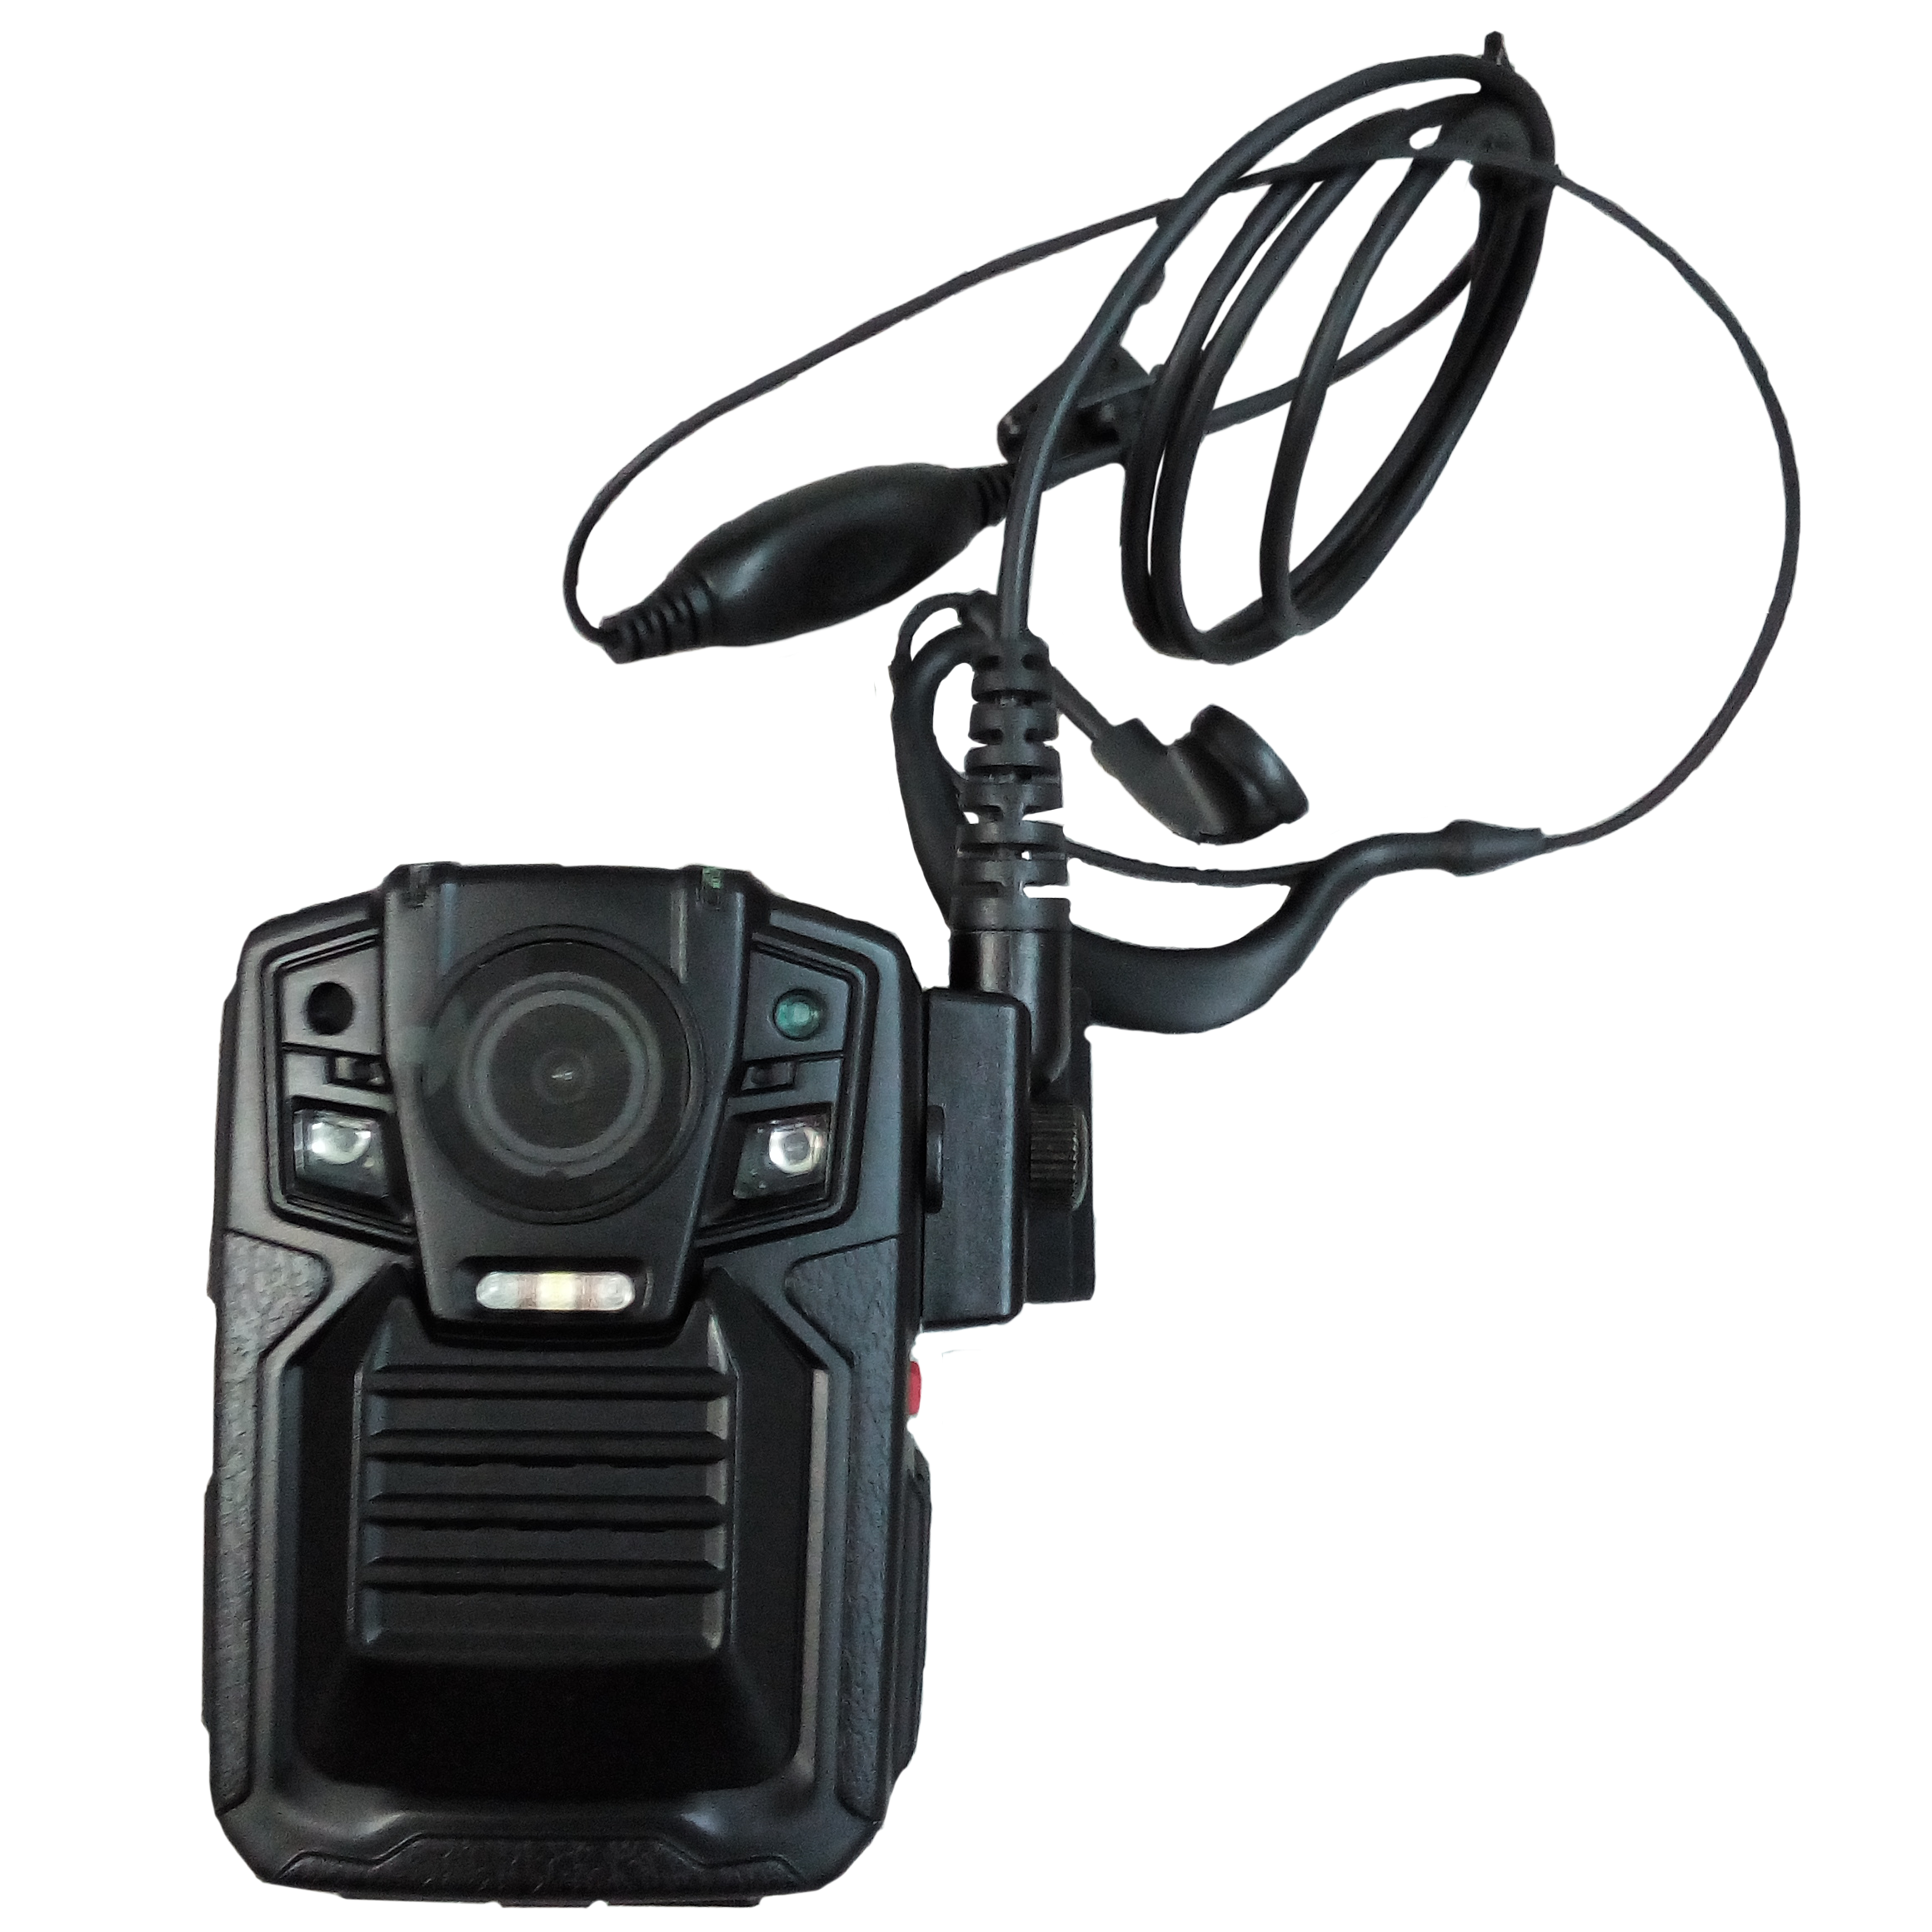 4G body camera front view assembled